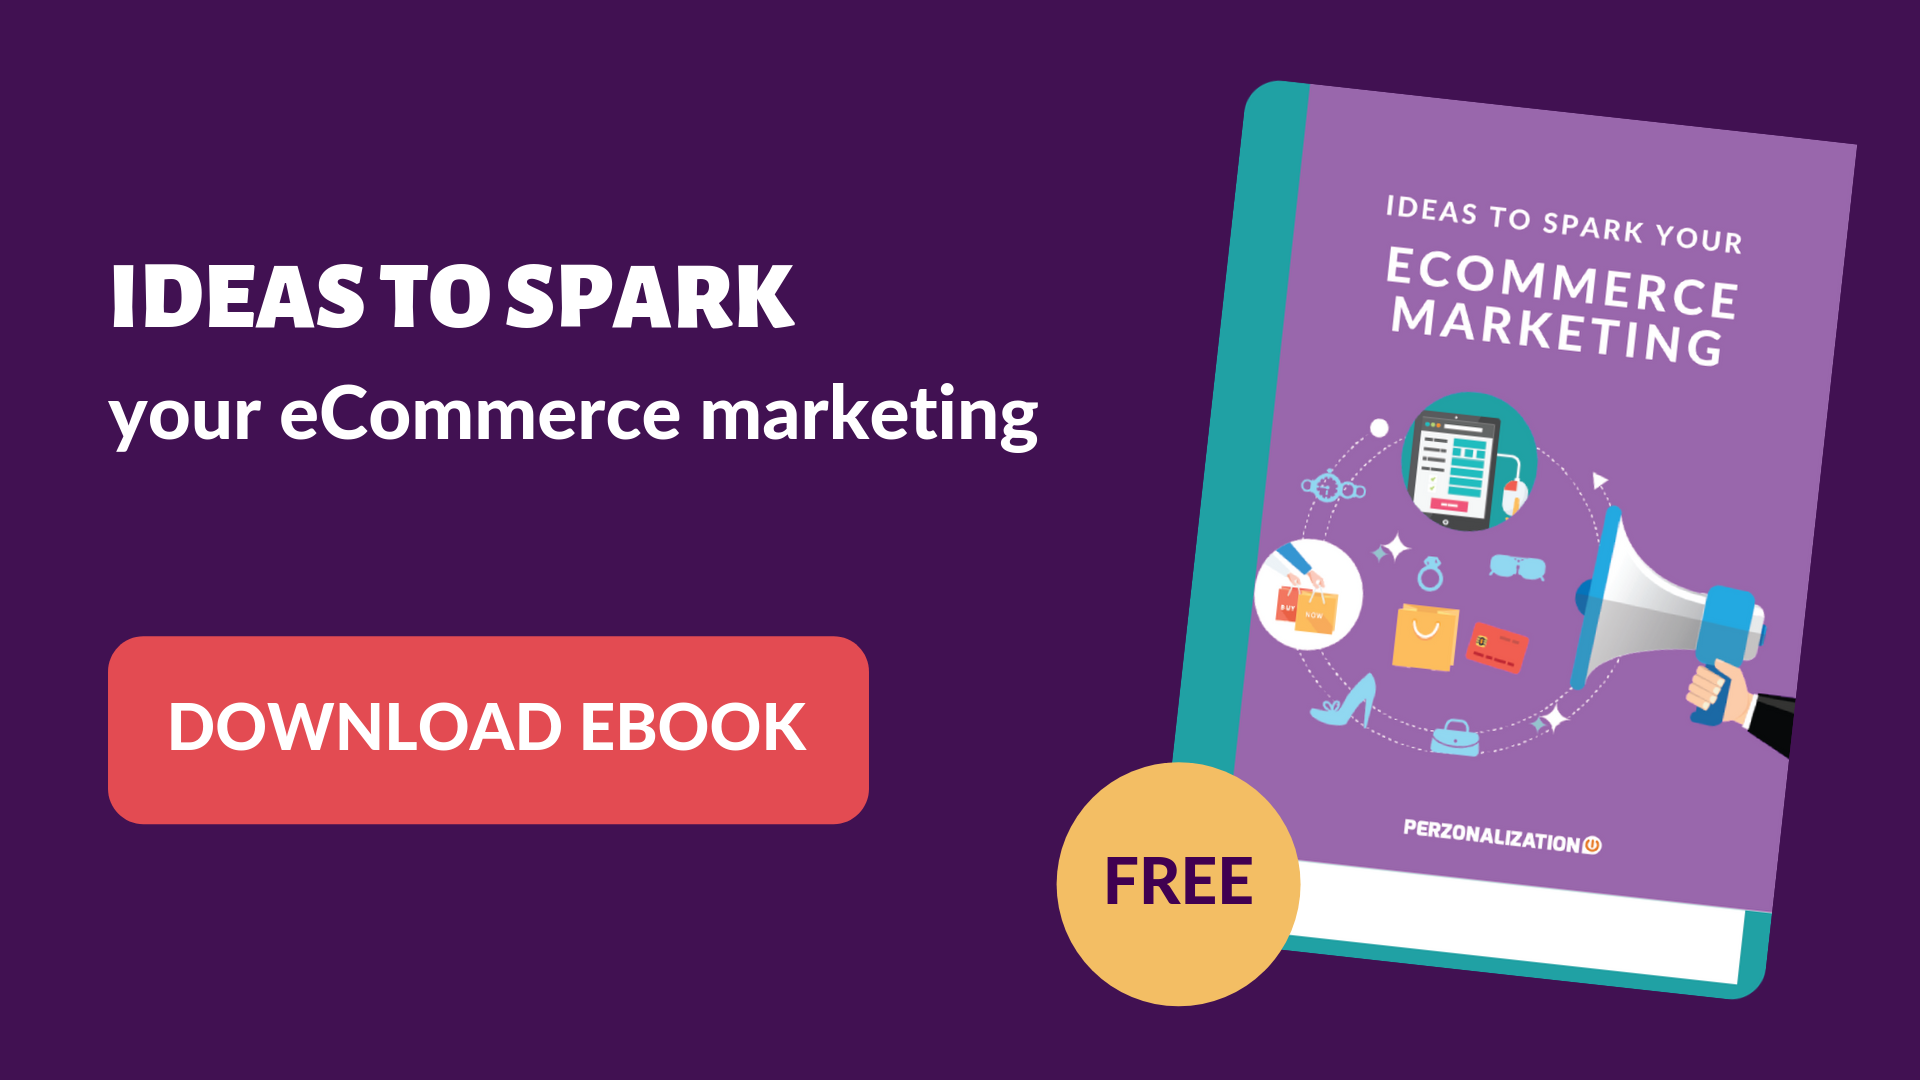 Download free eBook: Ideas to spark eCommerce marketing